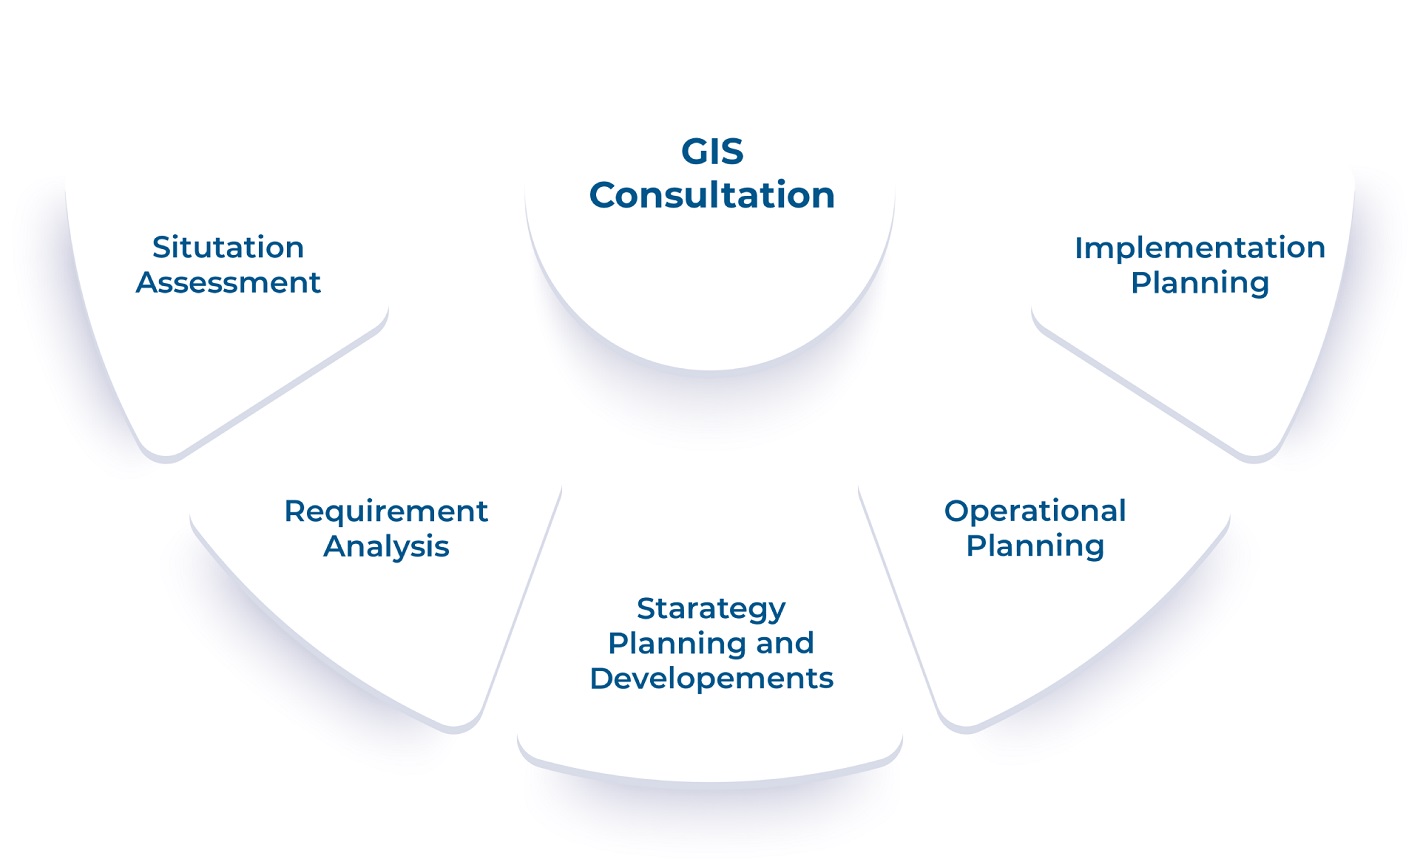 We offer expert GIS consultation, analyzing data, conducting situation assessments, and providing tailored solutions for strategic planning and implementation.